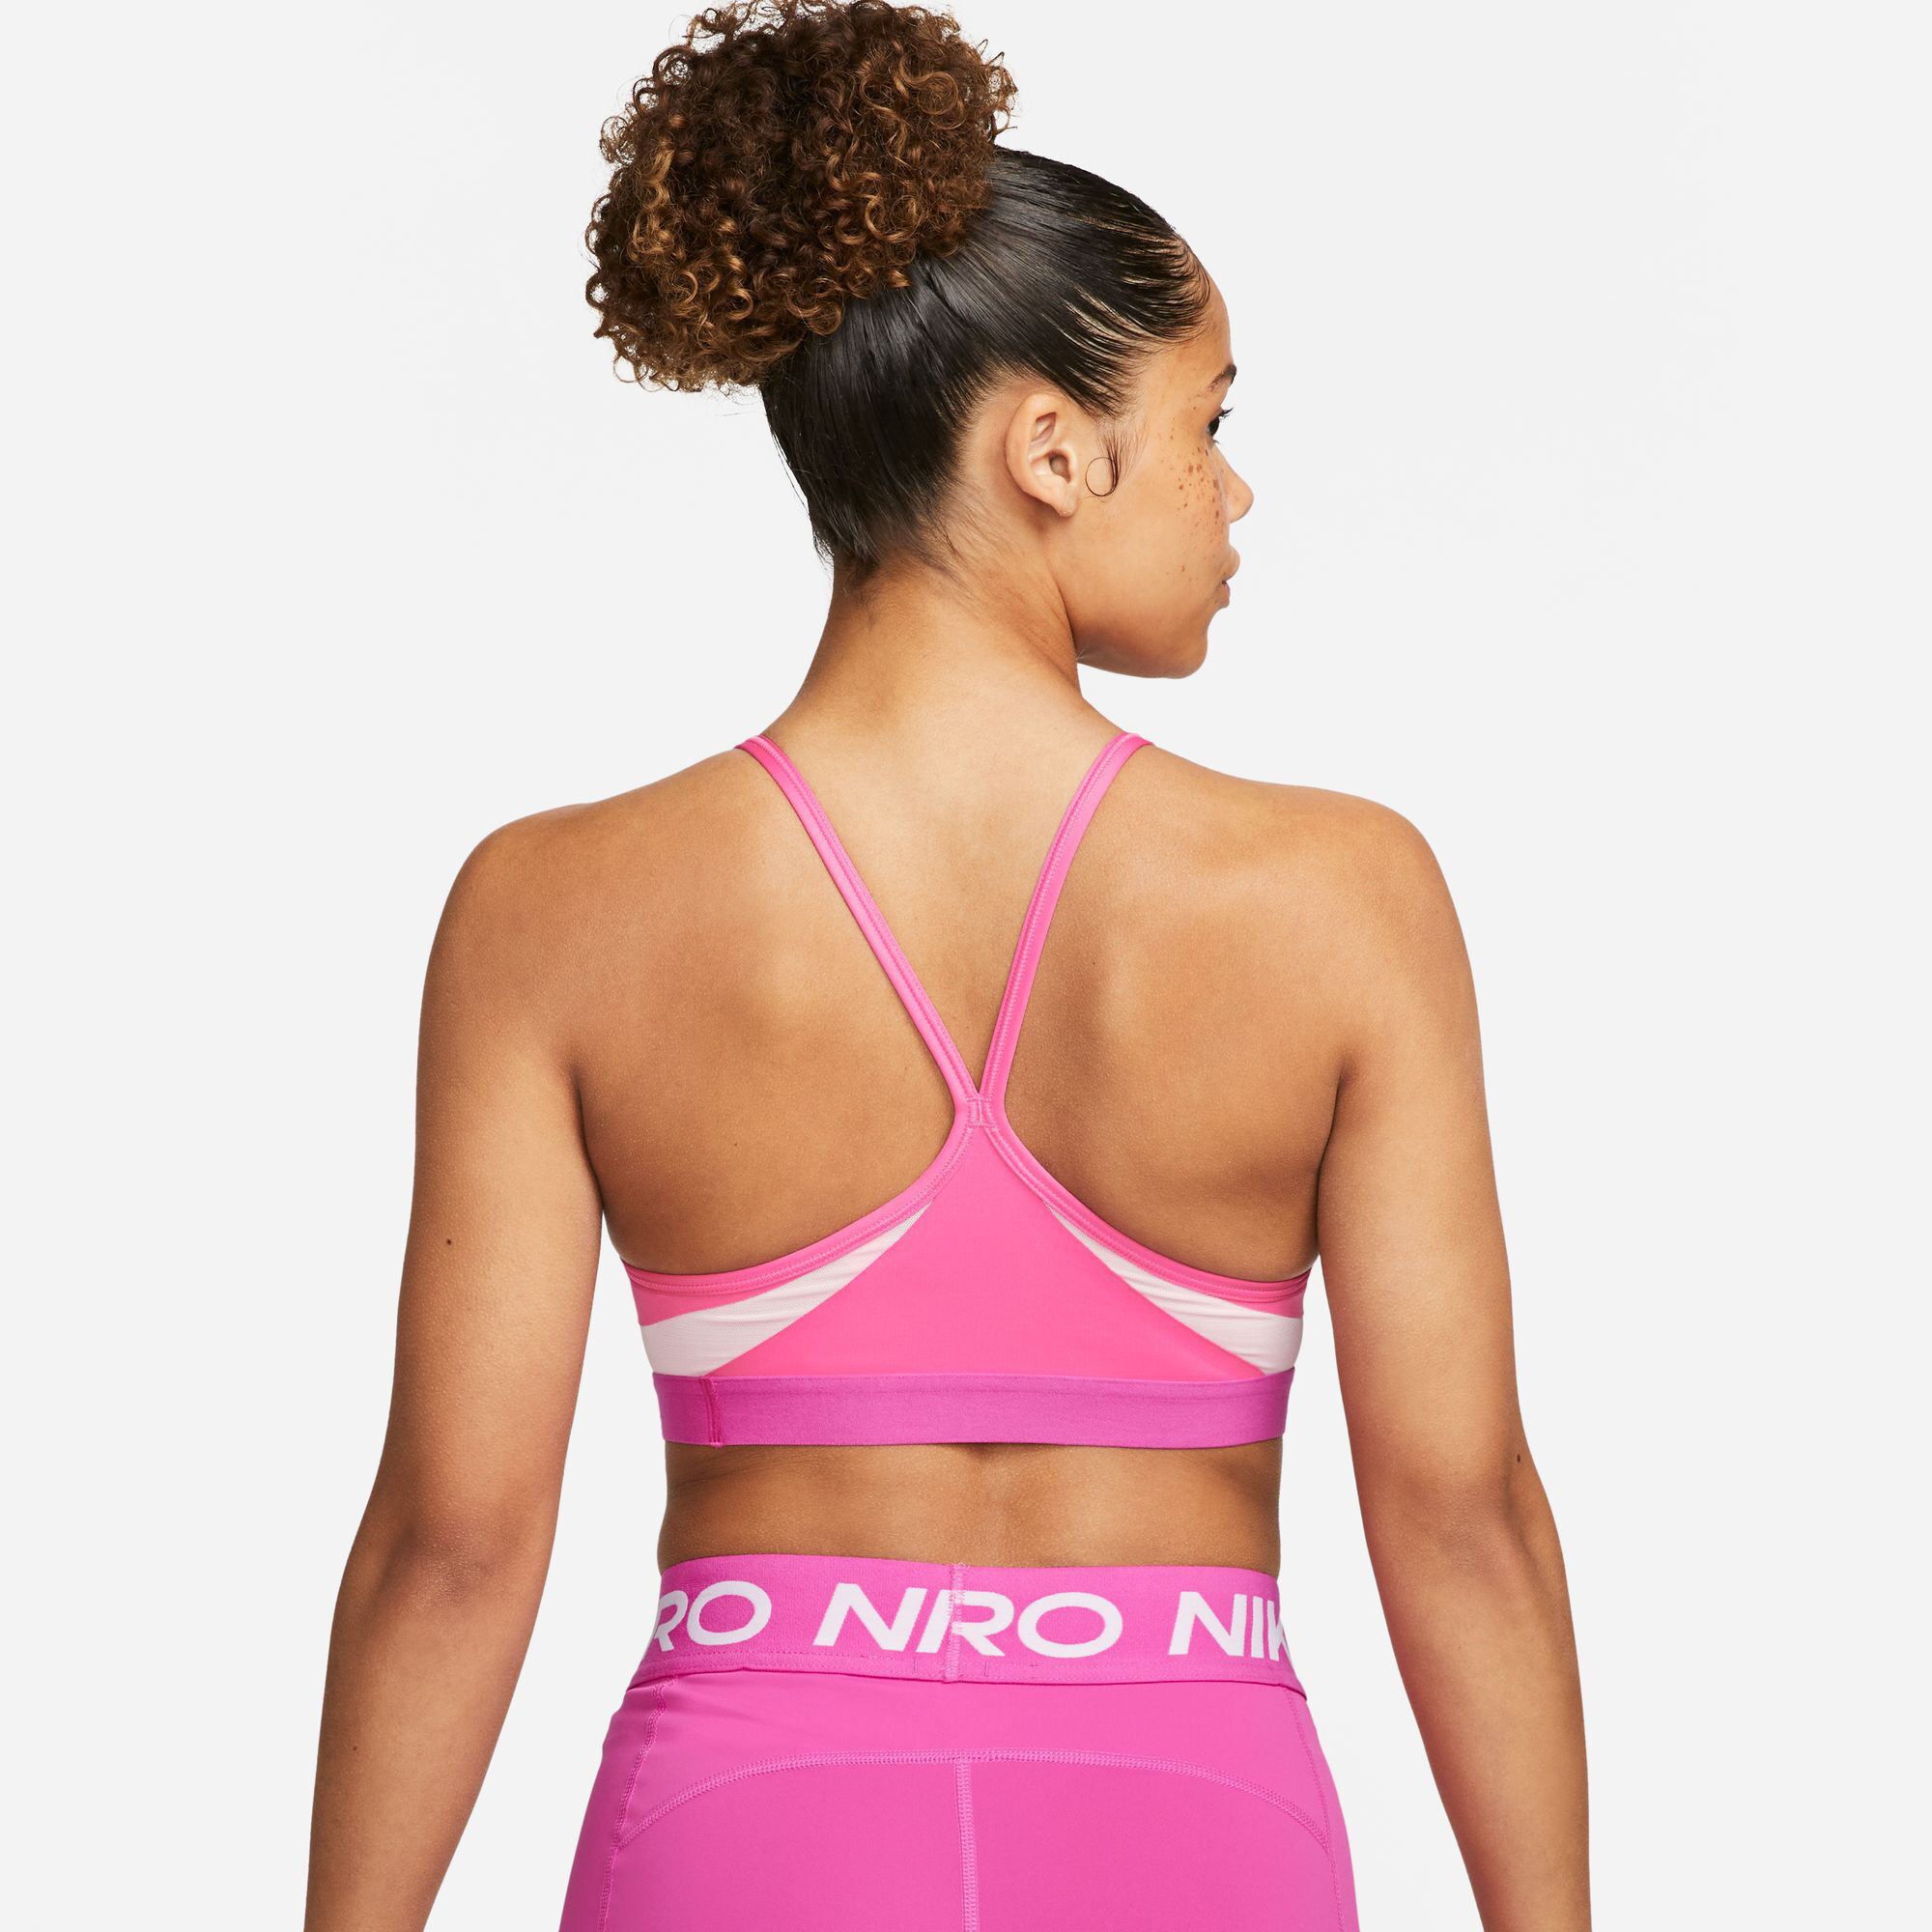 NIKE NIKE INDY LUXE YOGA BRA NVLTY, Pink Women's Top